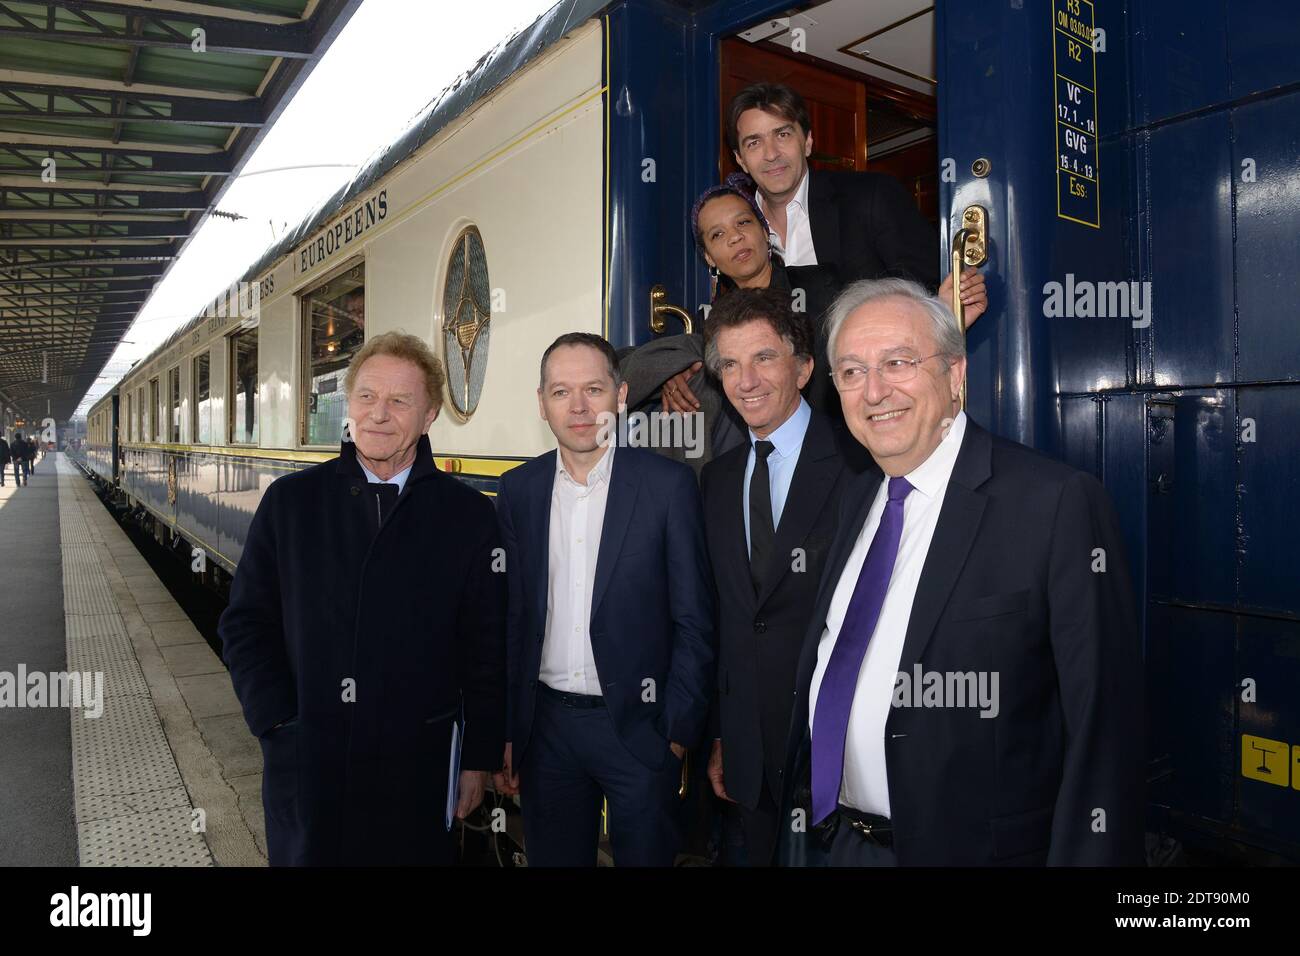 (L-R) Robert Namias, Patrick Ropert (SNCF), Jack Lang, Clemence Farrell, Yannick Alleno, Claude Mollard pose next to the 'Orient Express' train, as they present the exhibition 'Once Upon A Time The Orient Express' ('Il Etait Une Fois l'Orient Express') in Paris, France on March 13, 2014. The exhibit will be held at the Institut du Monde Arabe from April 3rd to the end of August. Photo by Ammar Abd Rabbo/ABACAPRESS.COM Stock Photo